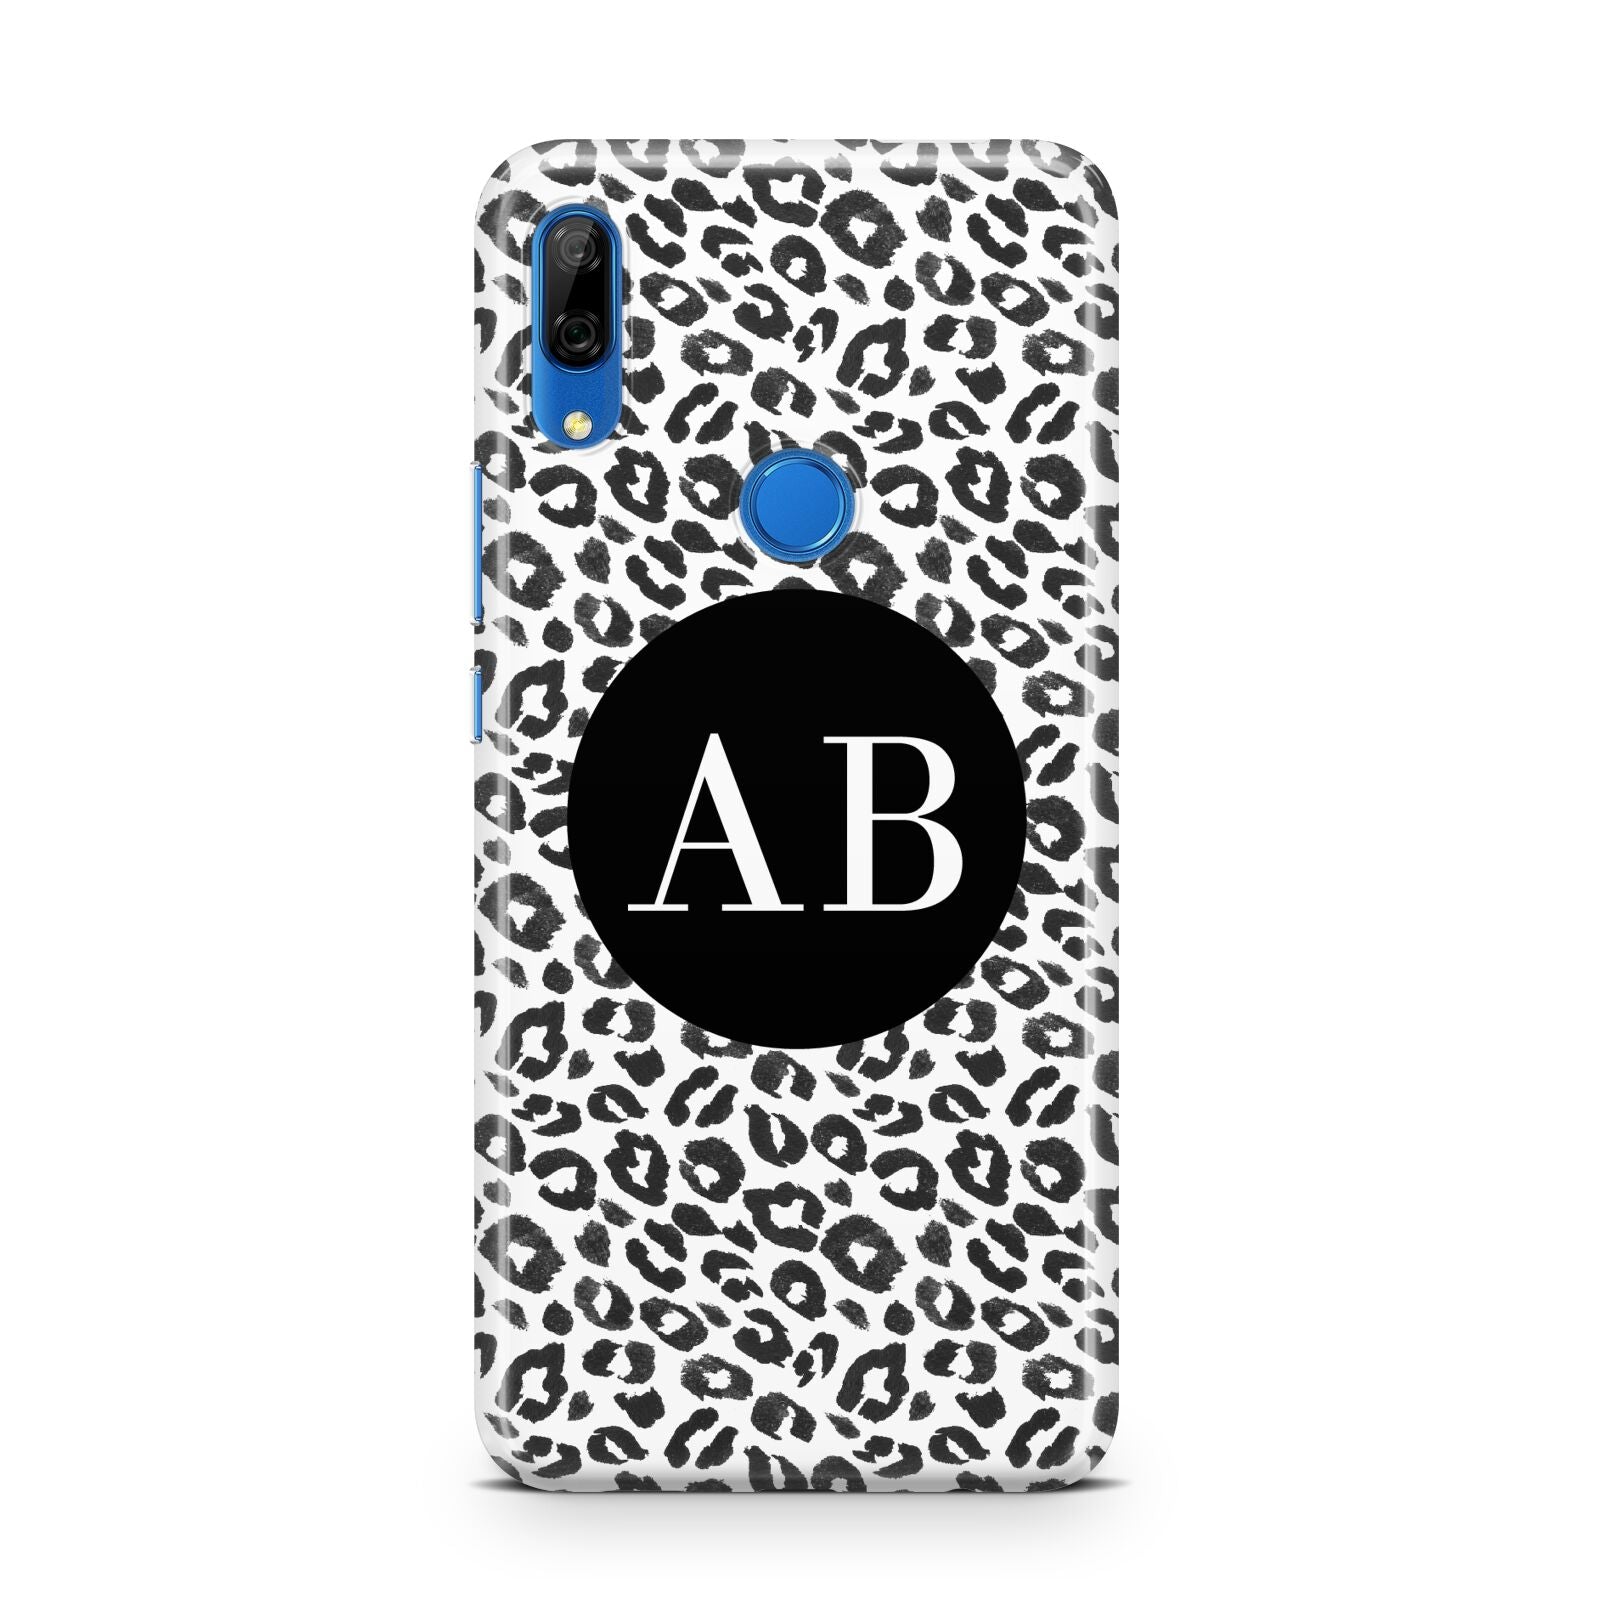 Leopard Print Black and White Huawei P Smart Z